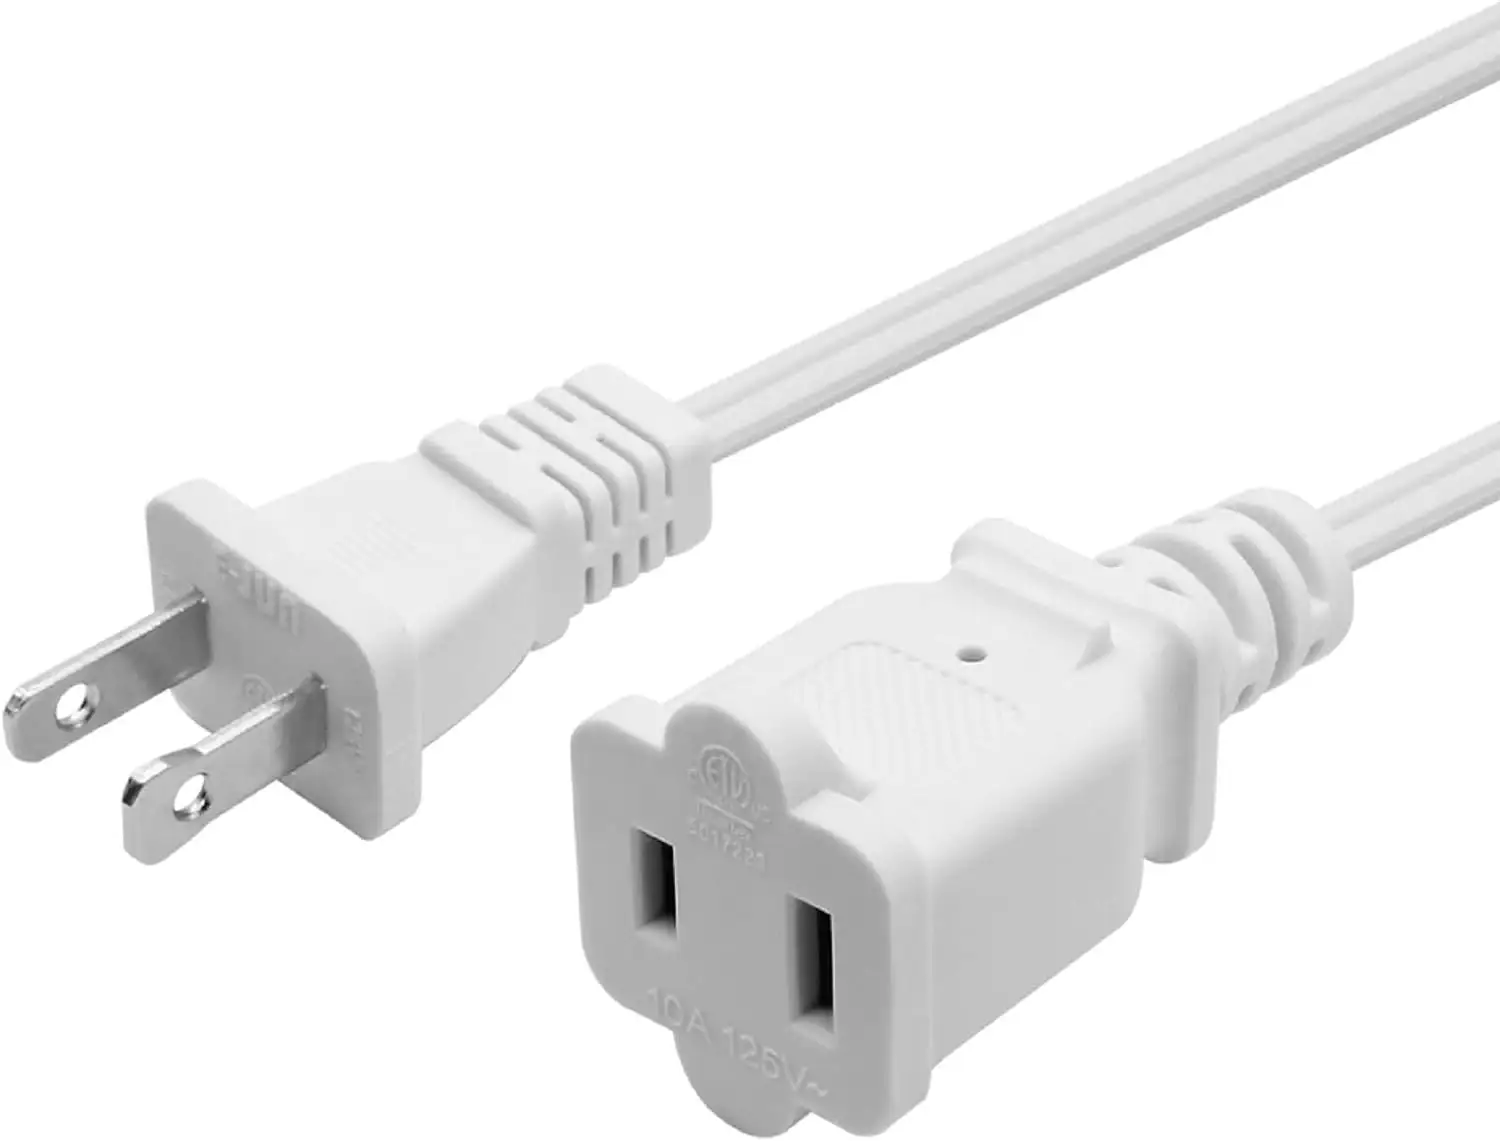 5 Ft US 2 Prong AC Extension Cord Indoor 2 Prong NEMA 1-15P to NEMA 1-15R Saver Power Extension Cord Cable white